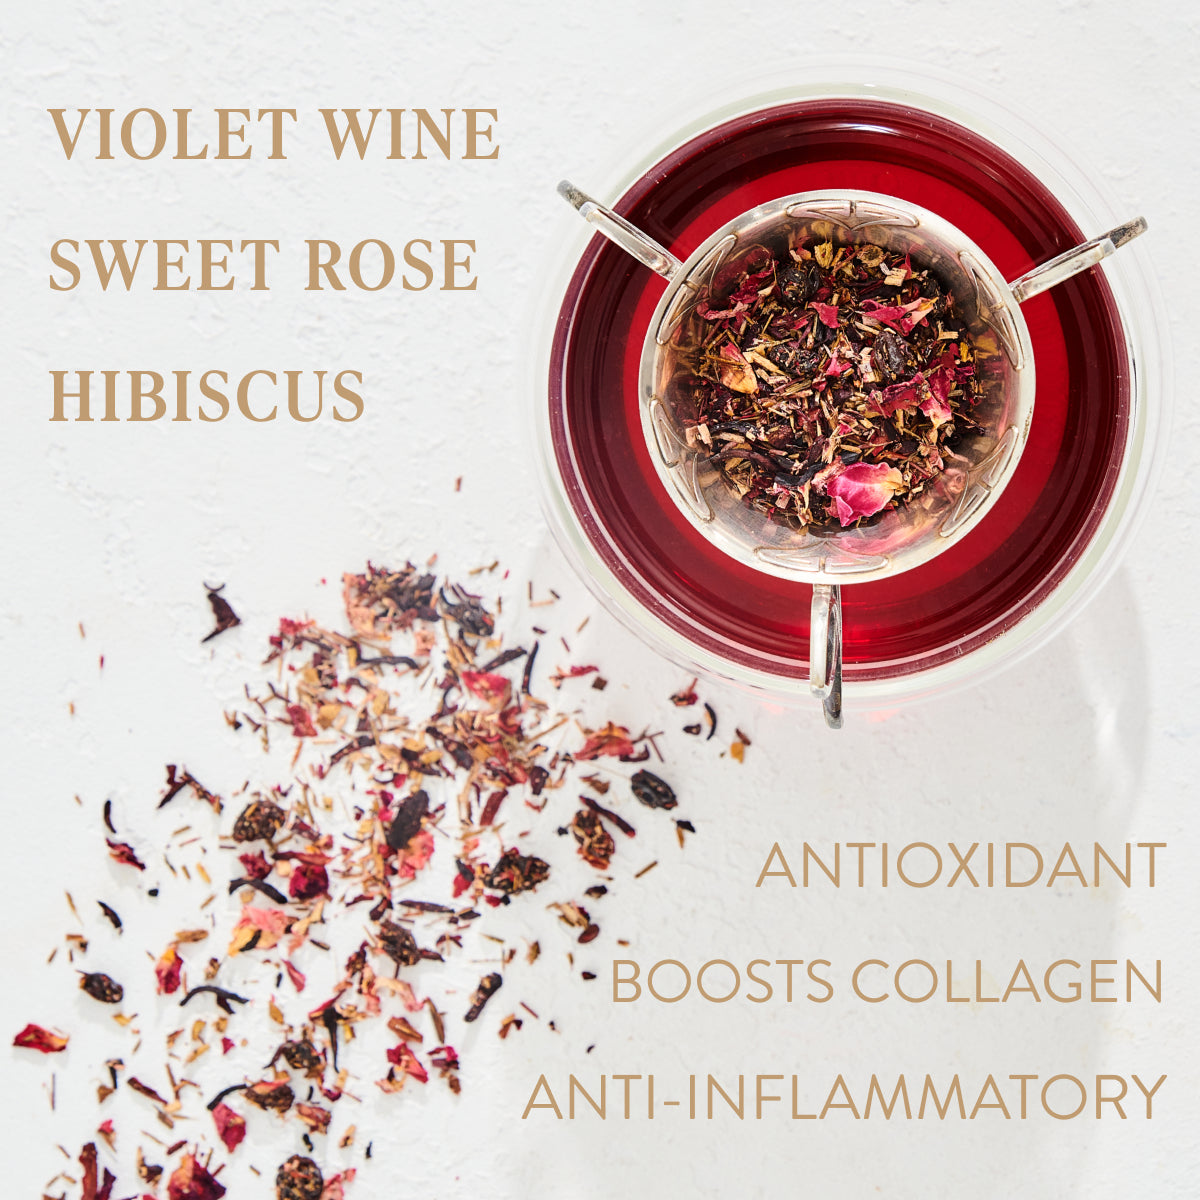 A top-down view of a glass containing a vibrant reddish-purple beverage with floral ingredients. Dried flower petals are scattered beside the glass. Text reads: "Garnet: Violet Wine Gemstone Wellness Tea" and "Antioxidant, Boosts Collagen, Anti-Inflammatory." Magic Hour's perfectly blended Loose Leaf Tea for a magical experience.